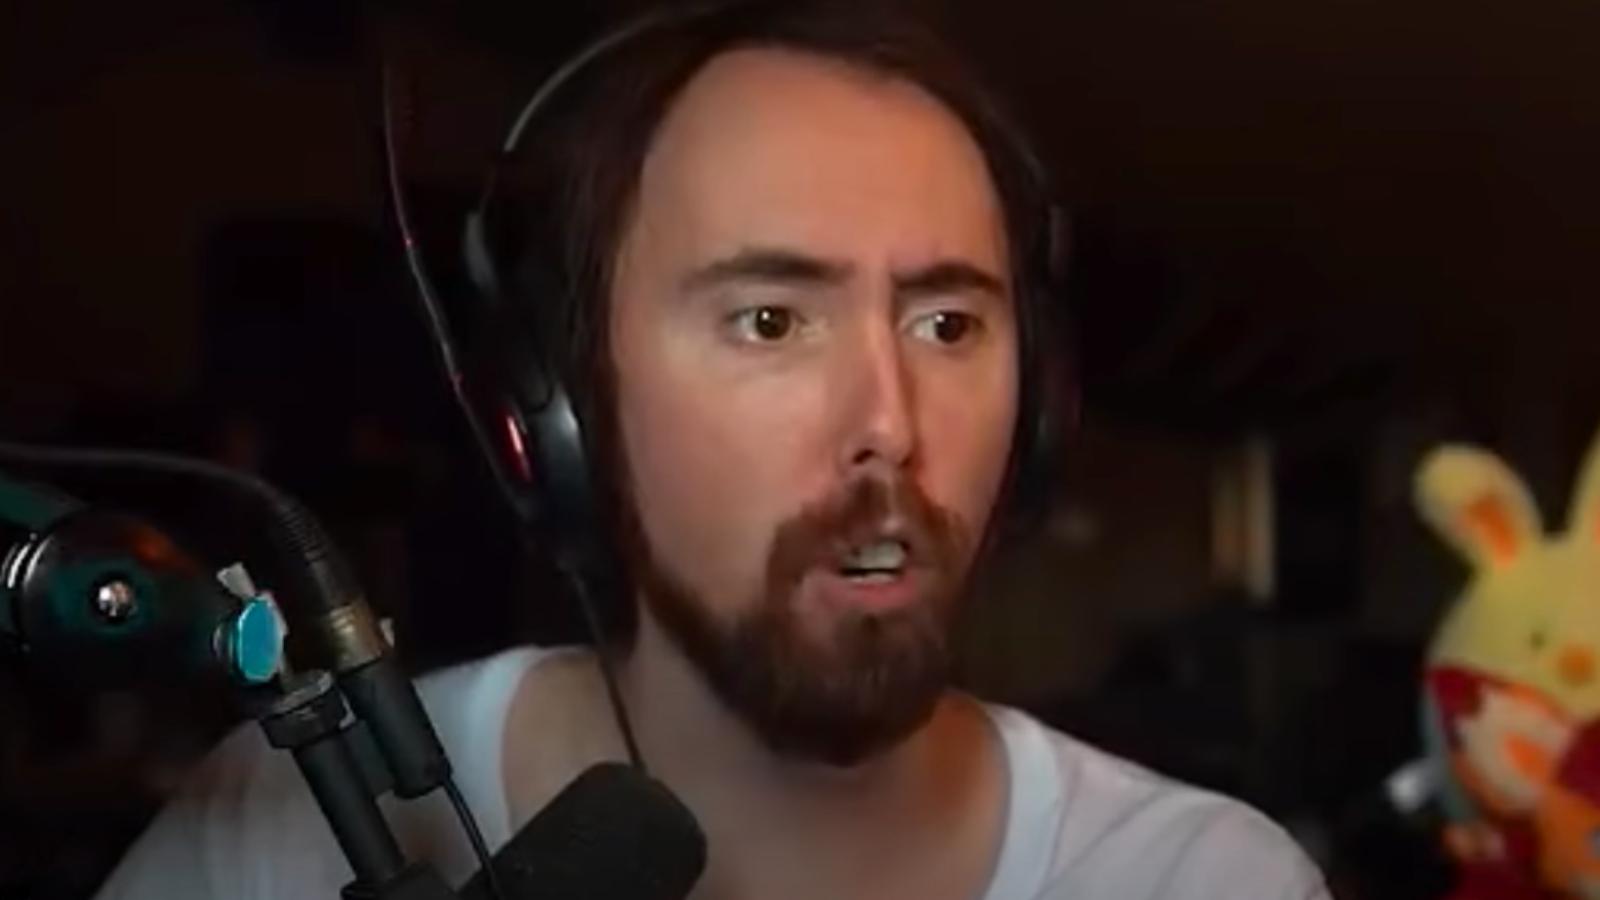 Asmongold streaming on Twitch.